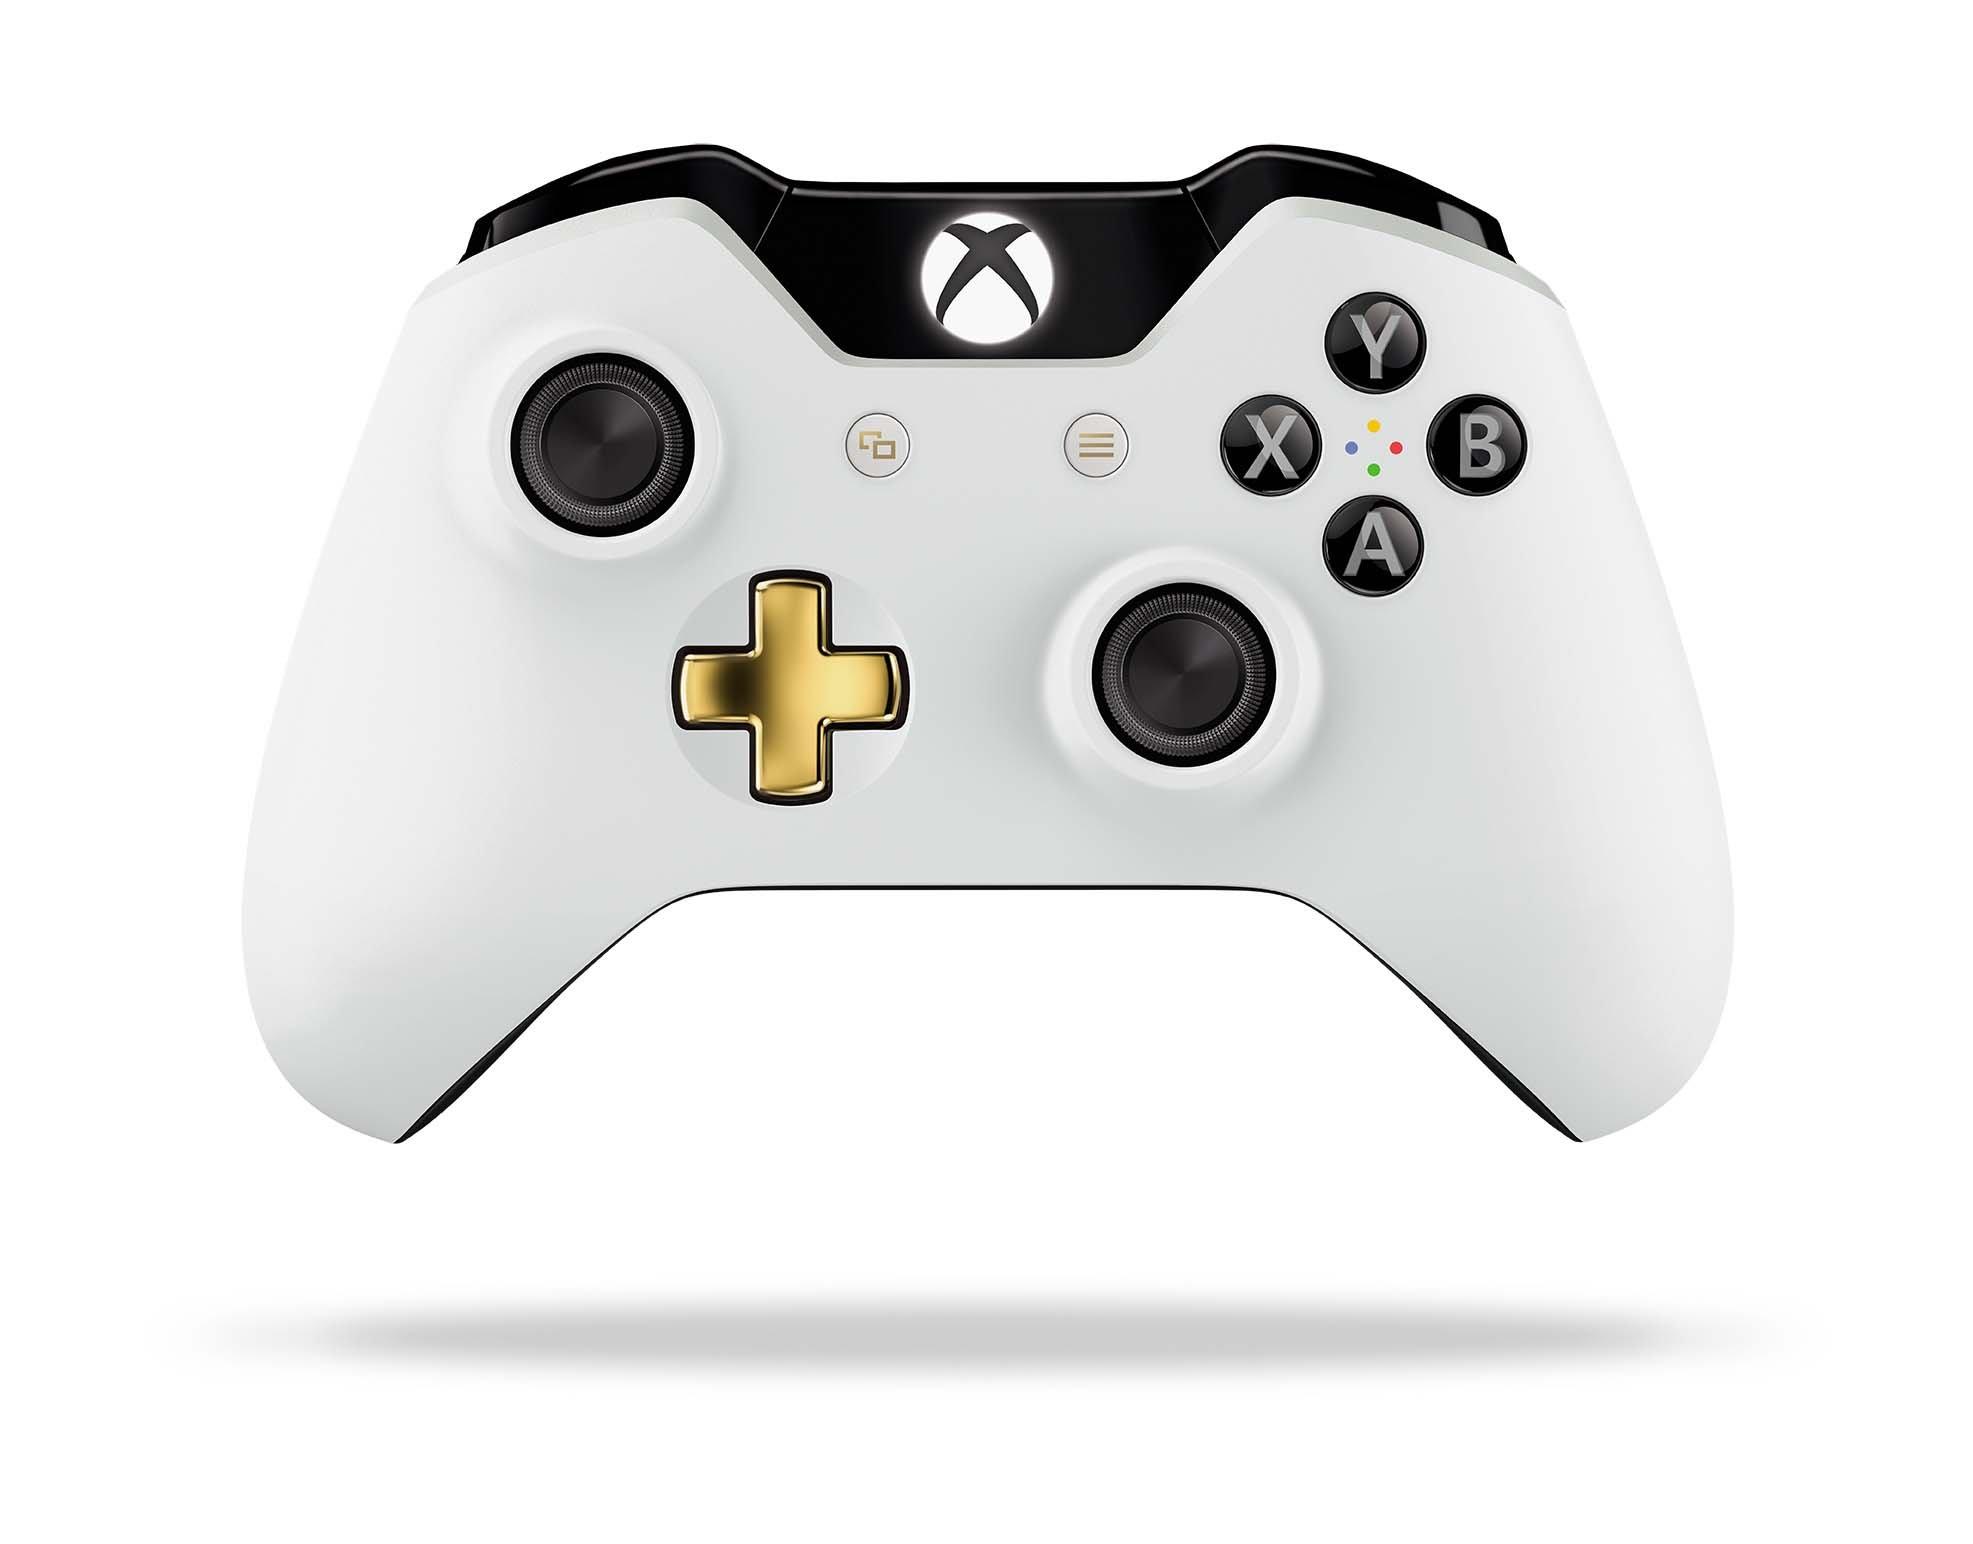 kollision Blænding Vred Microsoft Xbox One Wireless Controller Midnight Forces | GameStop